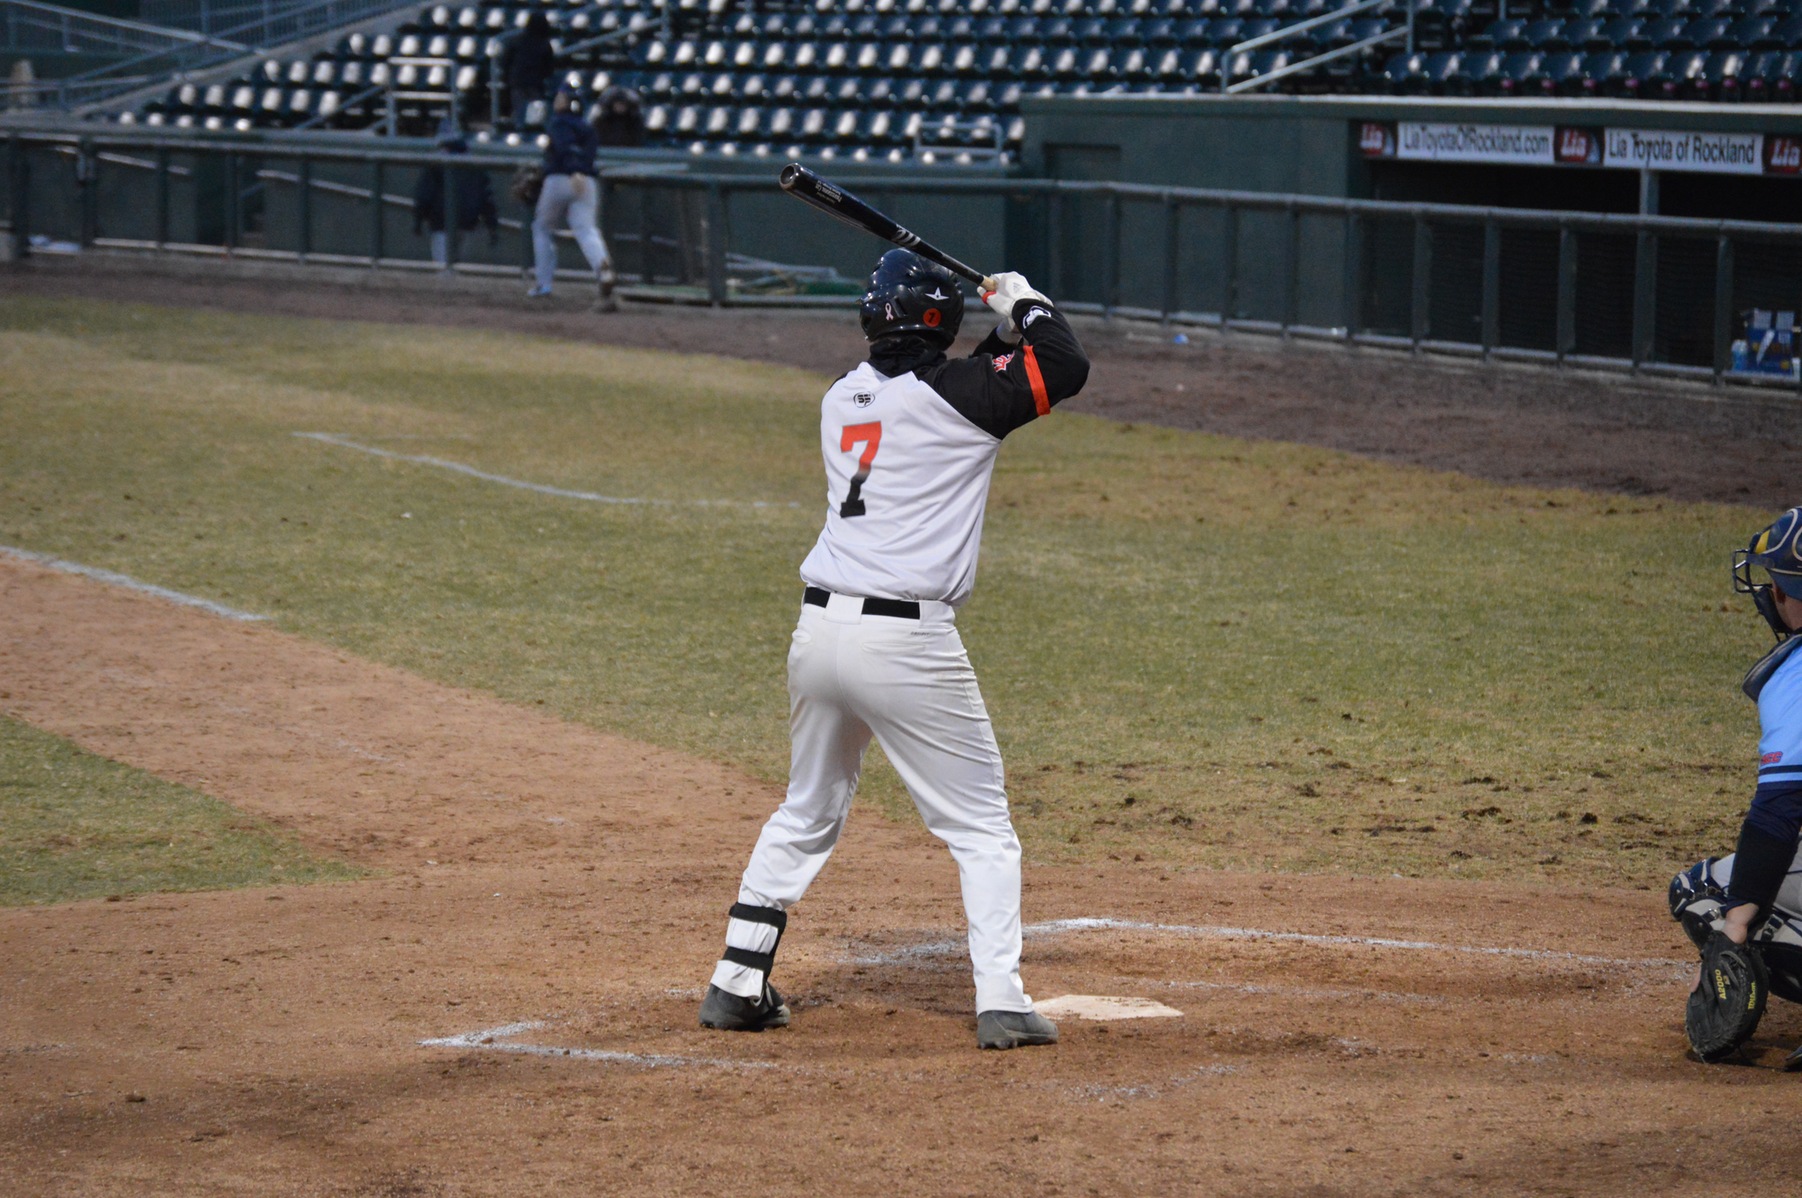 BRIAN ROTELLA EARNS GAME-WINNING HIT IN GAME TWO OF SPLIT WITH CONCORDIA